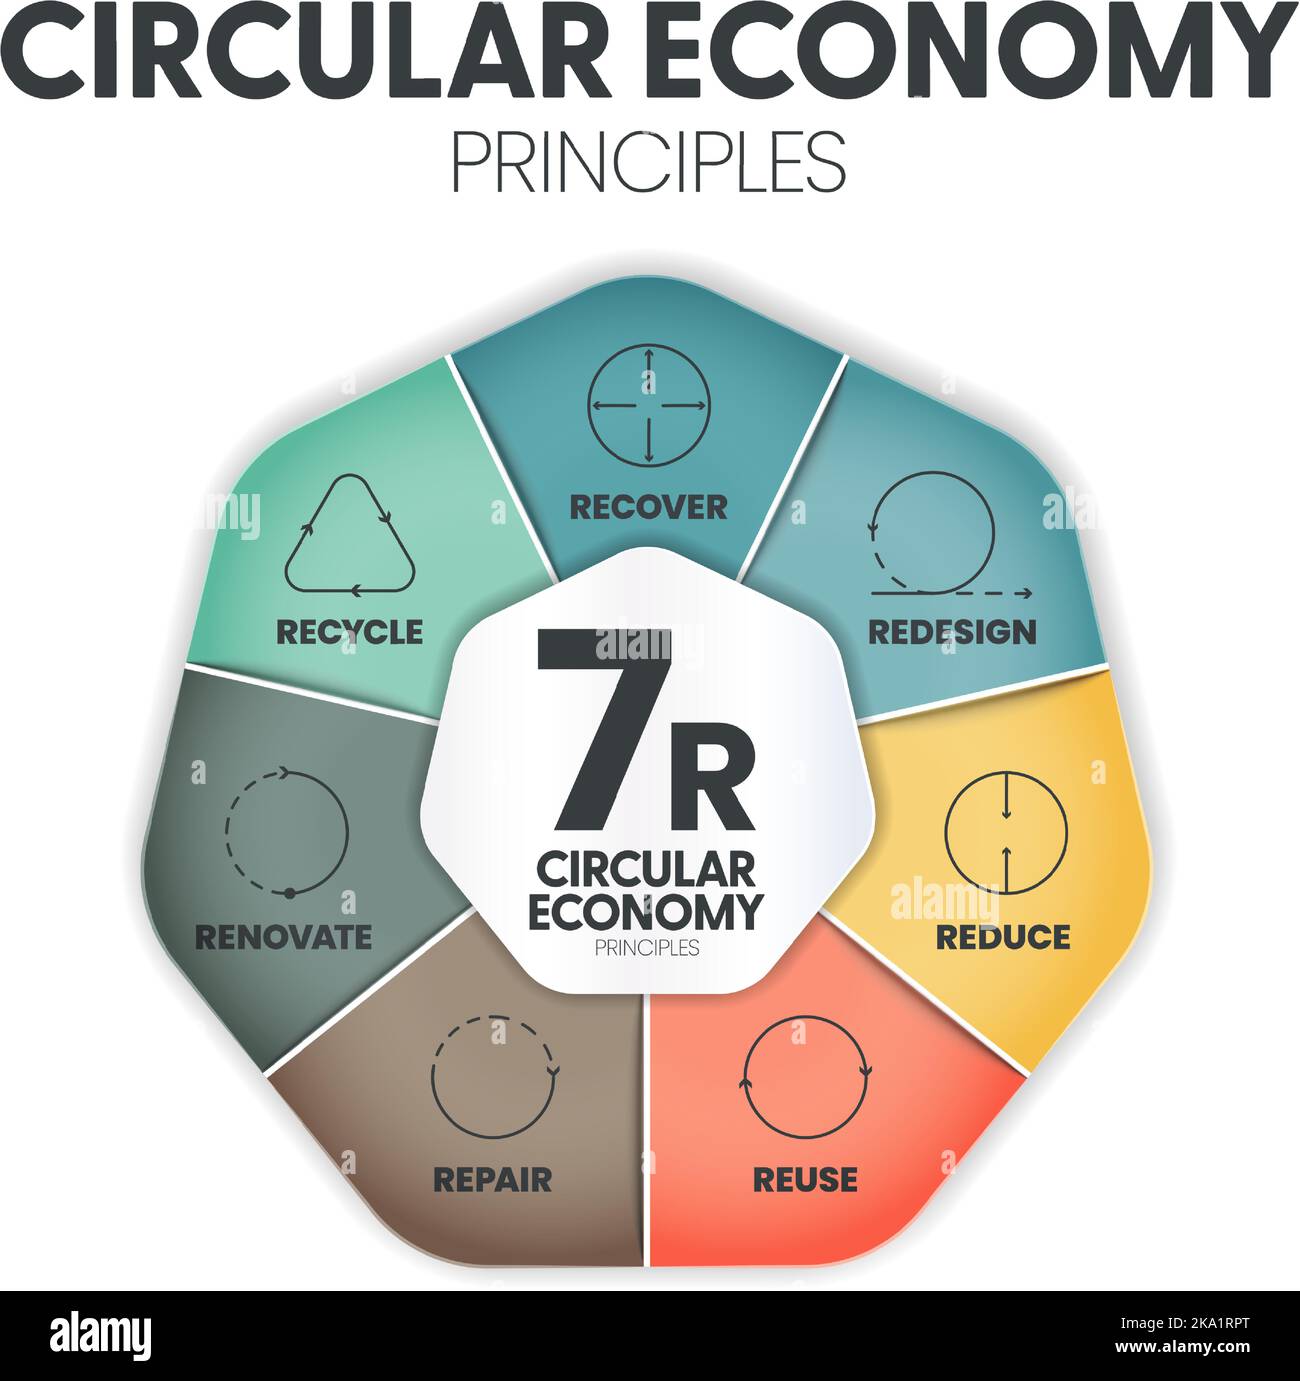 7R circular economy principles concept for economic sustainability of production and consumption has 7 steps to analyze such as reduce, recycle, recov Stock Vector